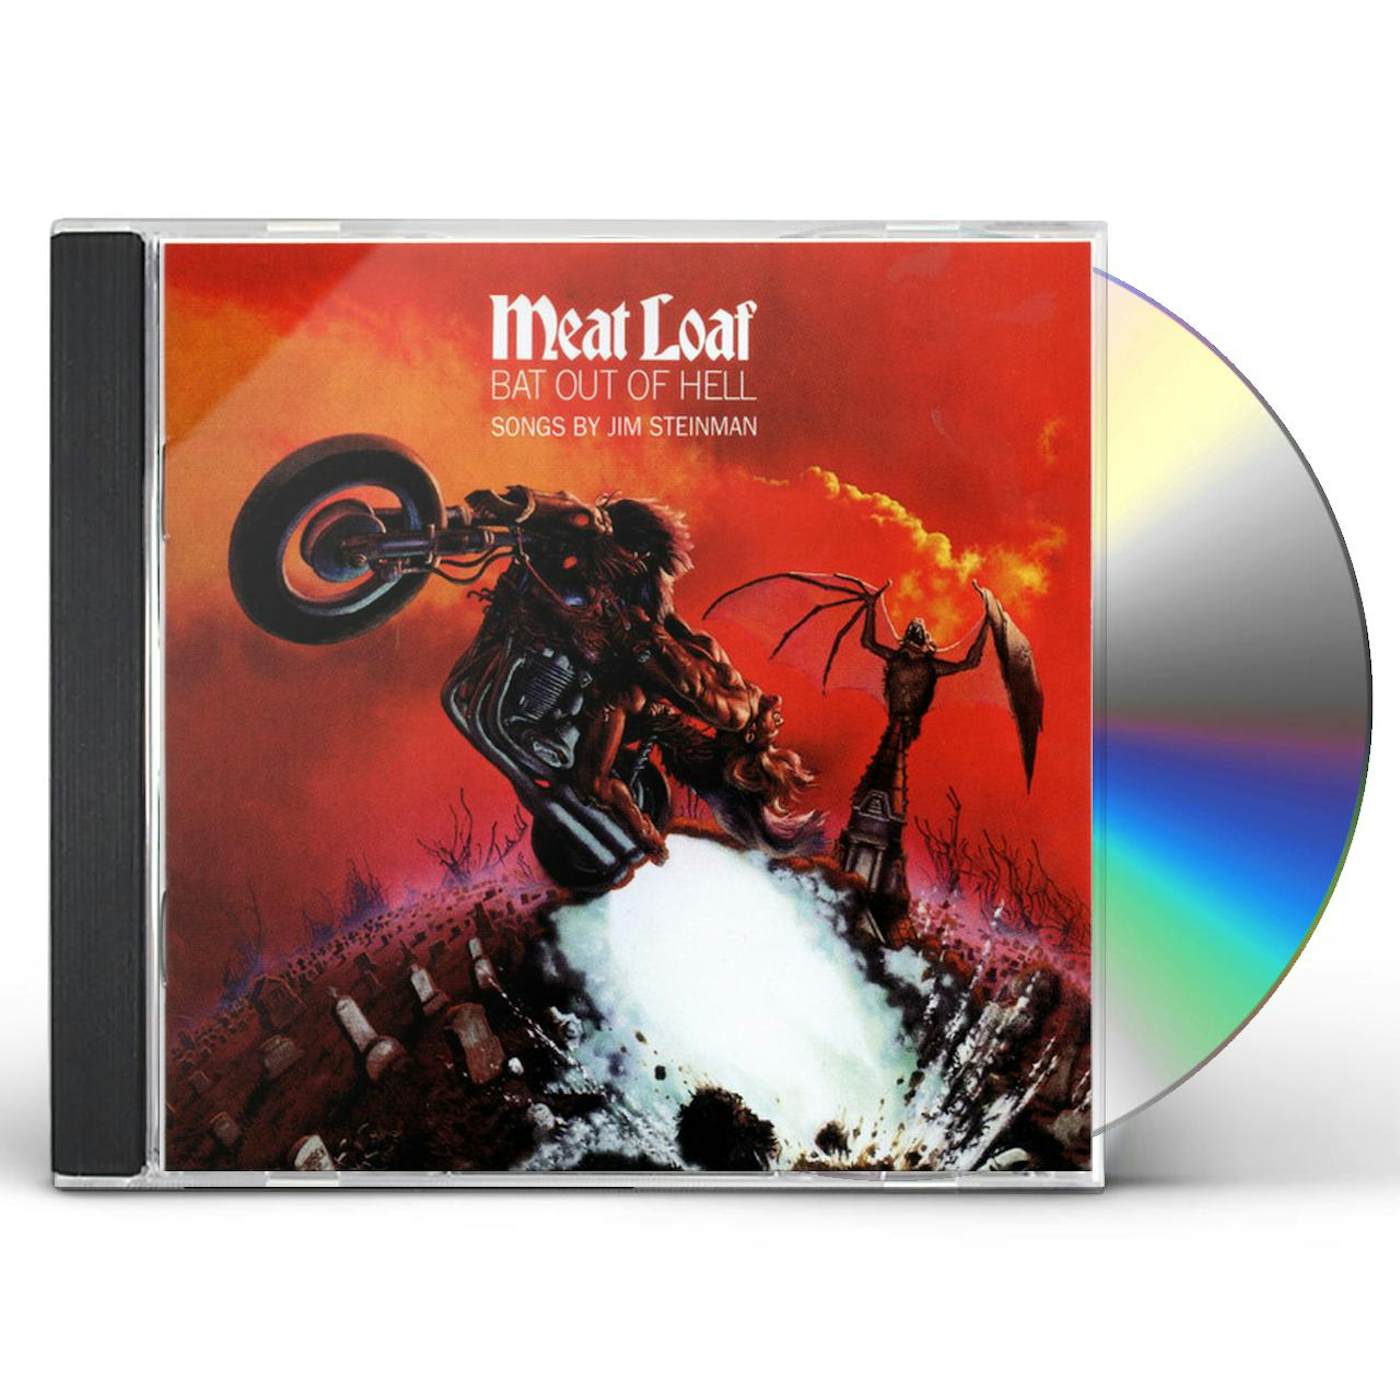 Meat Loaf BAT OUT OF HELL (GOLD SERIES) CD